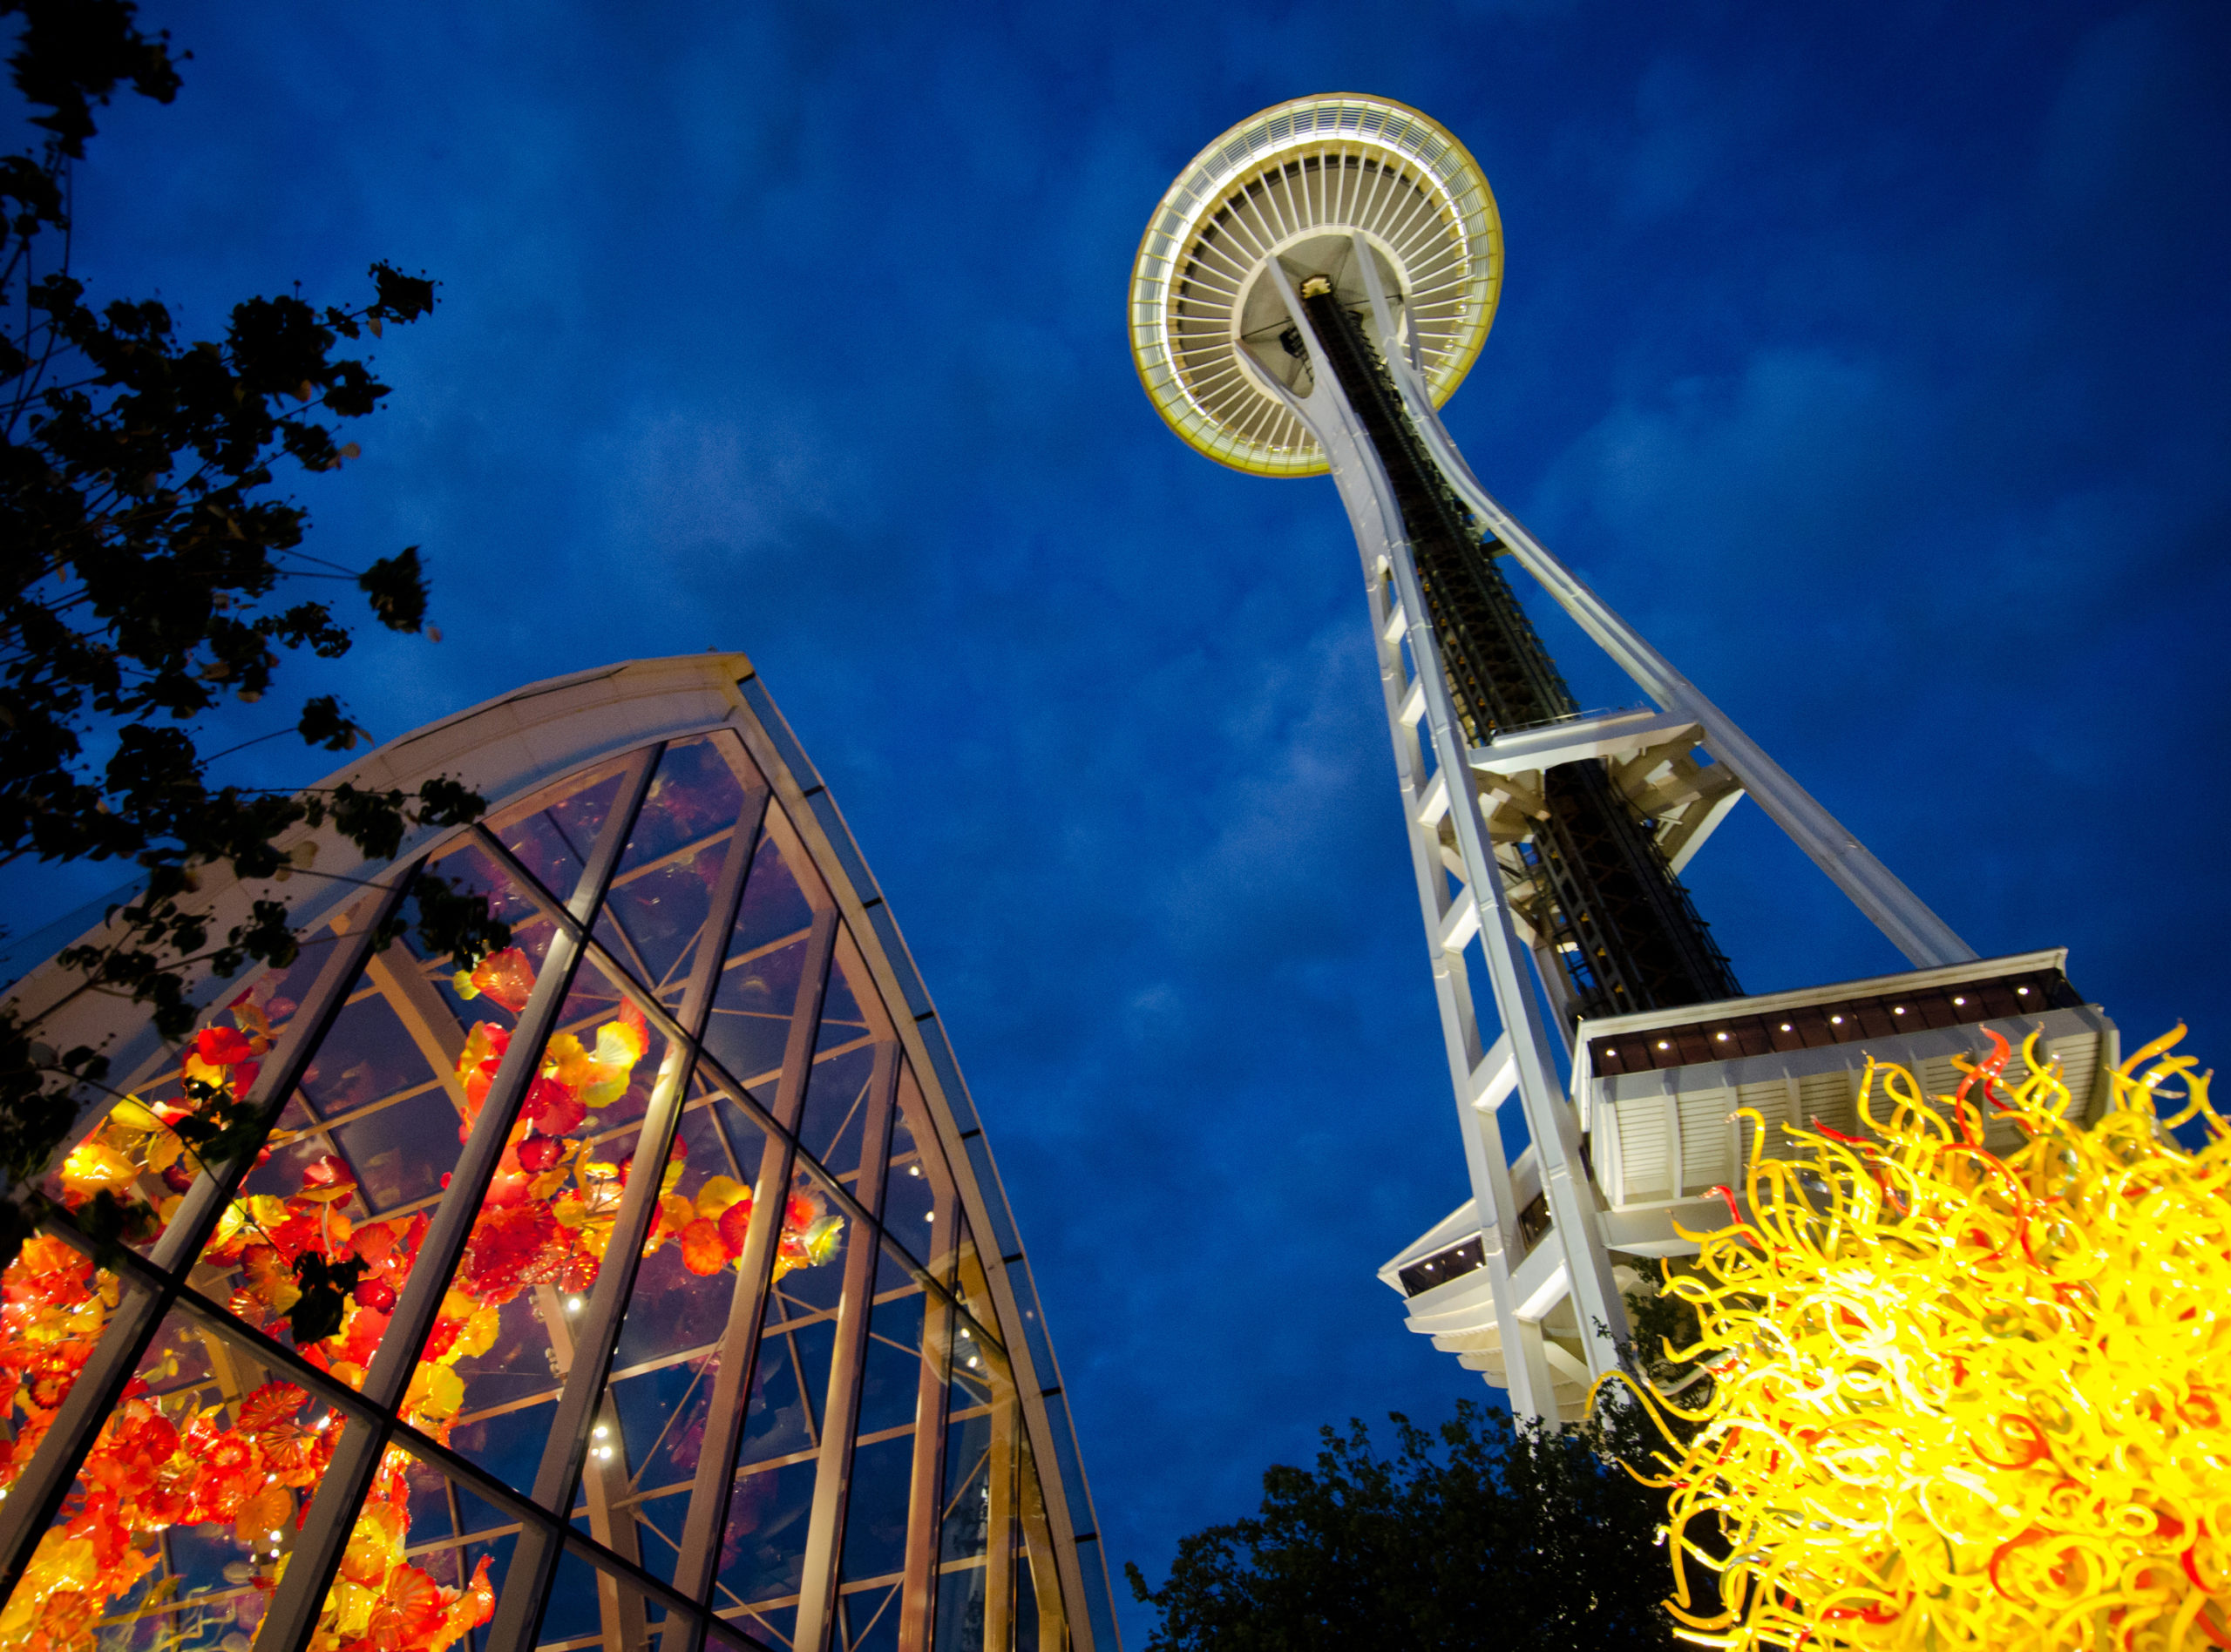 Chihuly Sculptures and Seattle's Space Needle